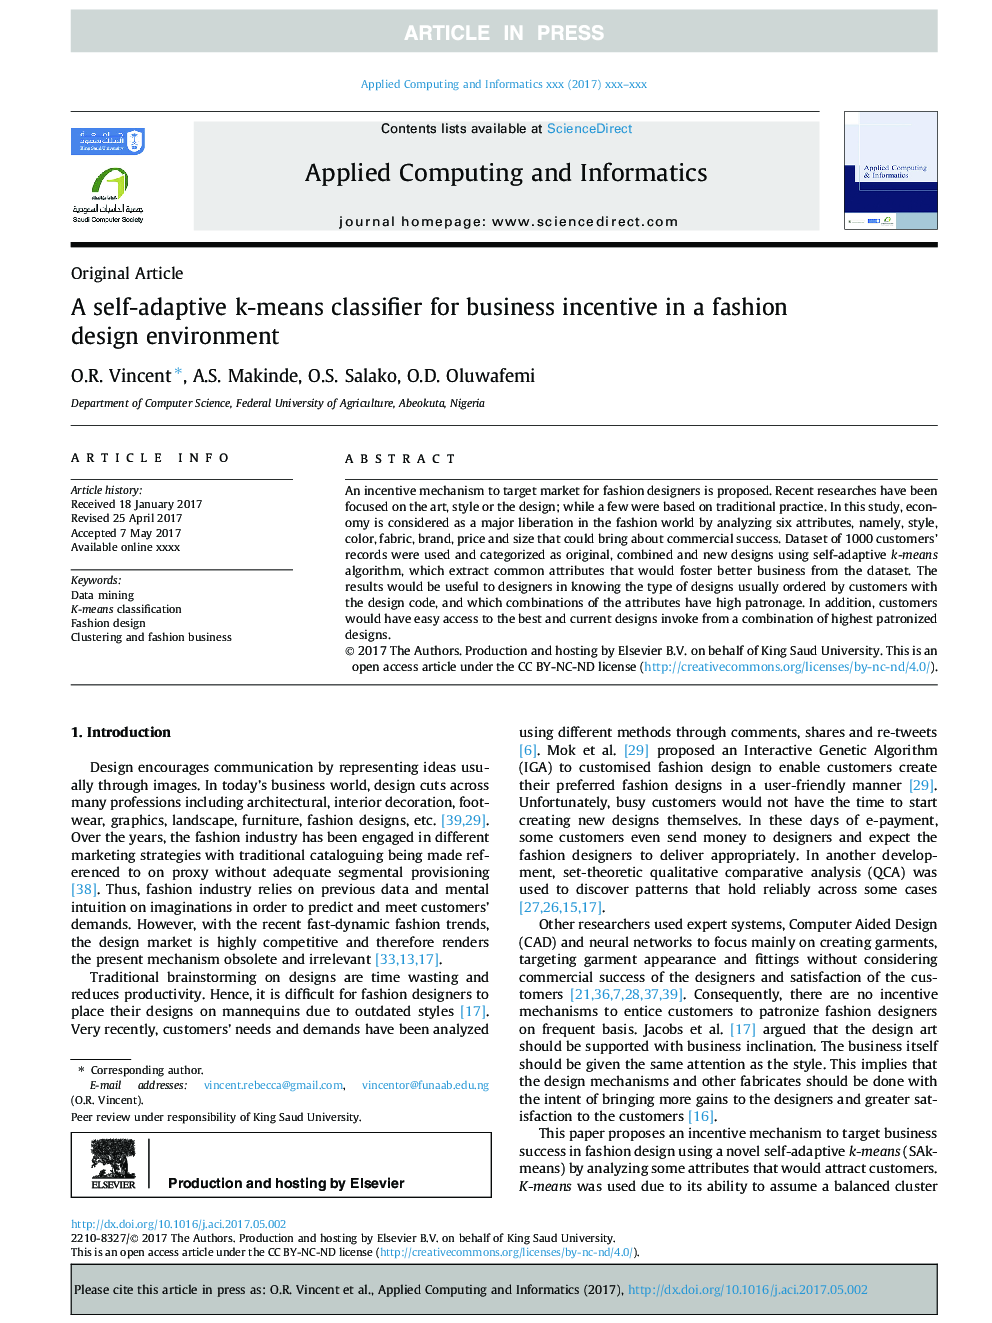 A self-adaptive k-means classifier for business incentive in a fashion design environment